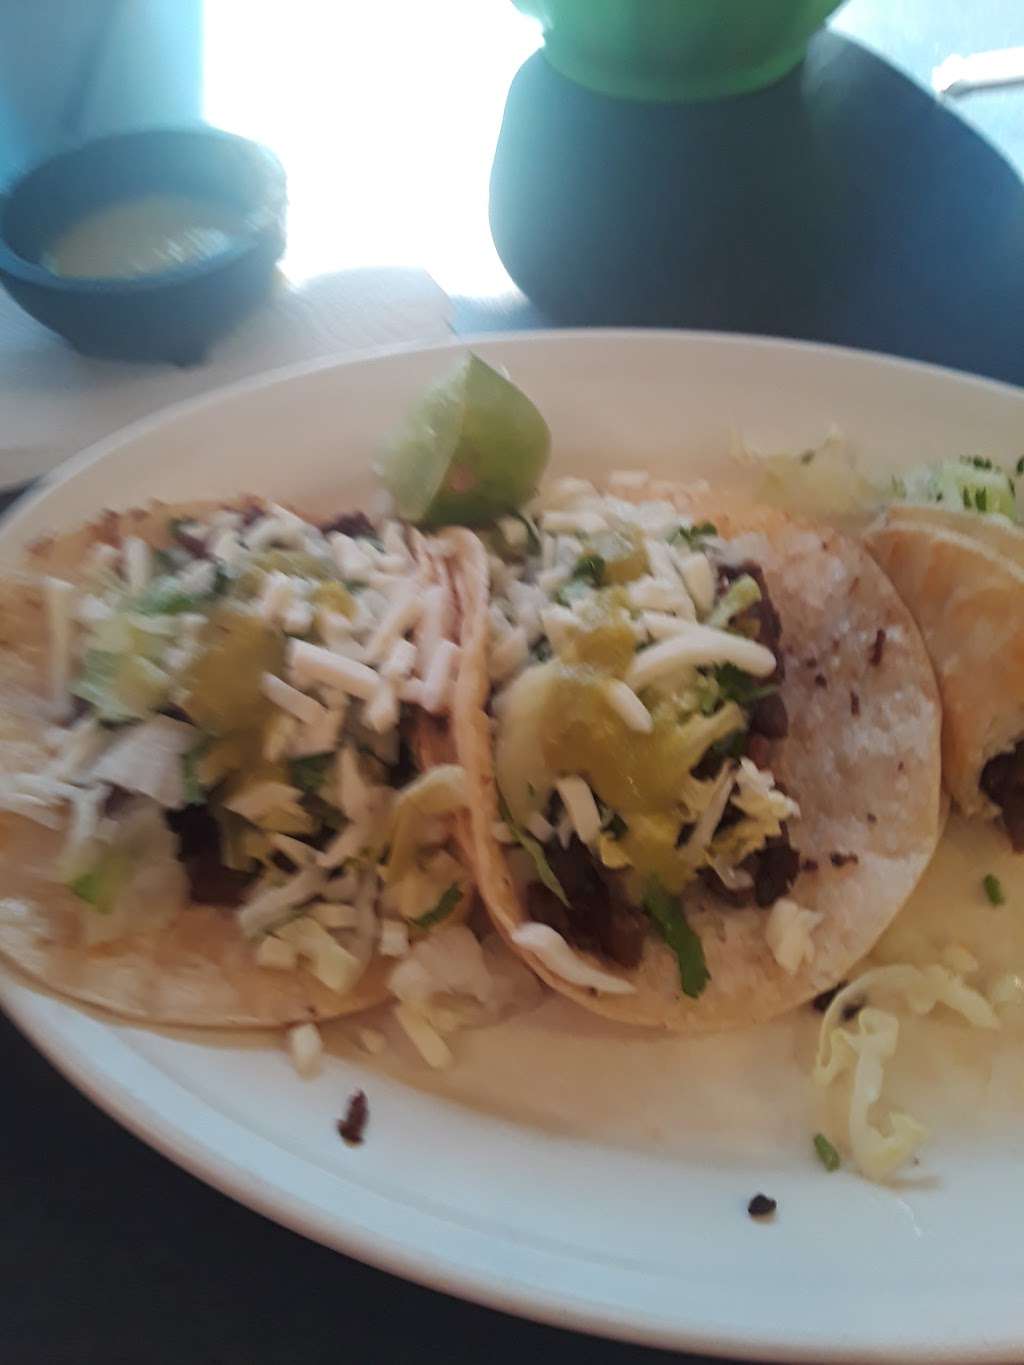 Best Taco | 403 Dell Dale St, Channelview, TX 77530 | Phone: (281) 864-9201